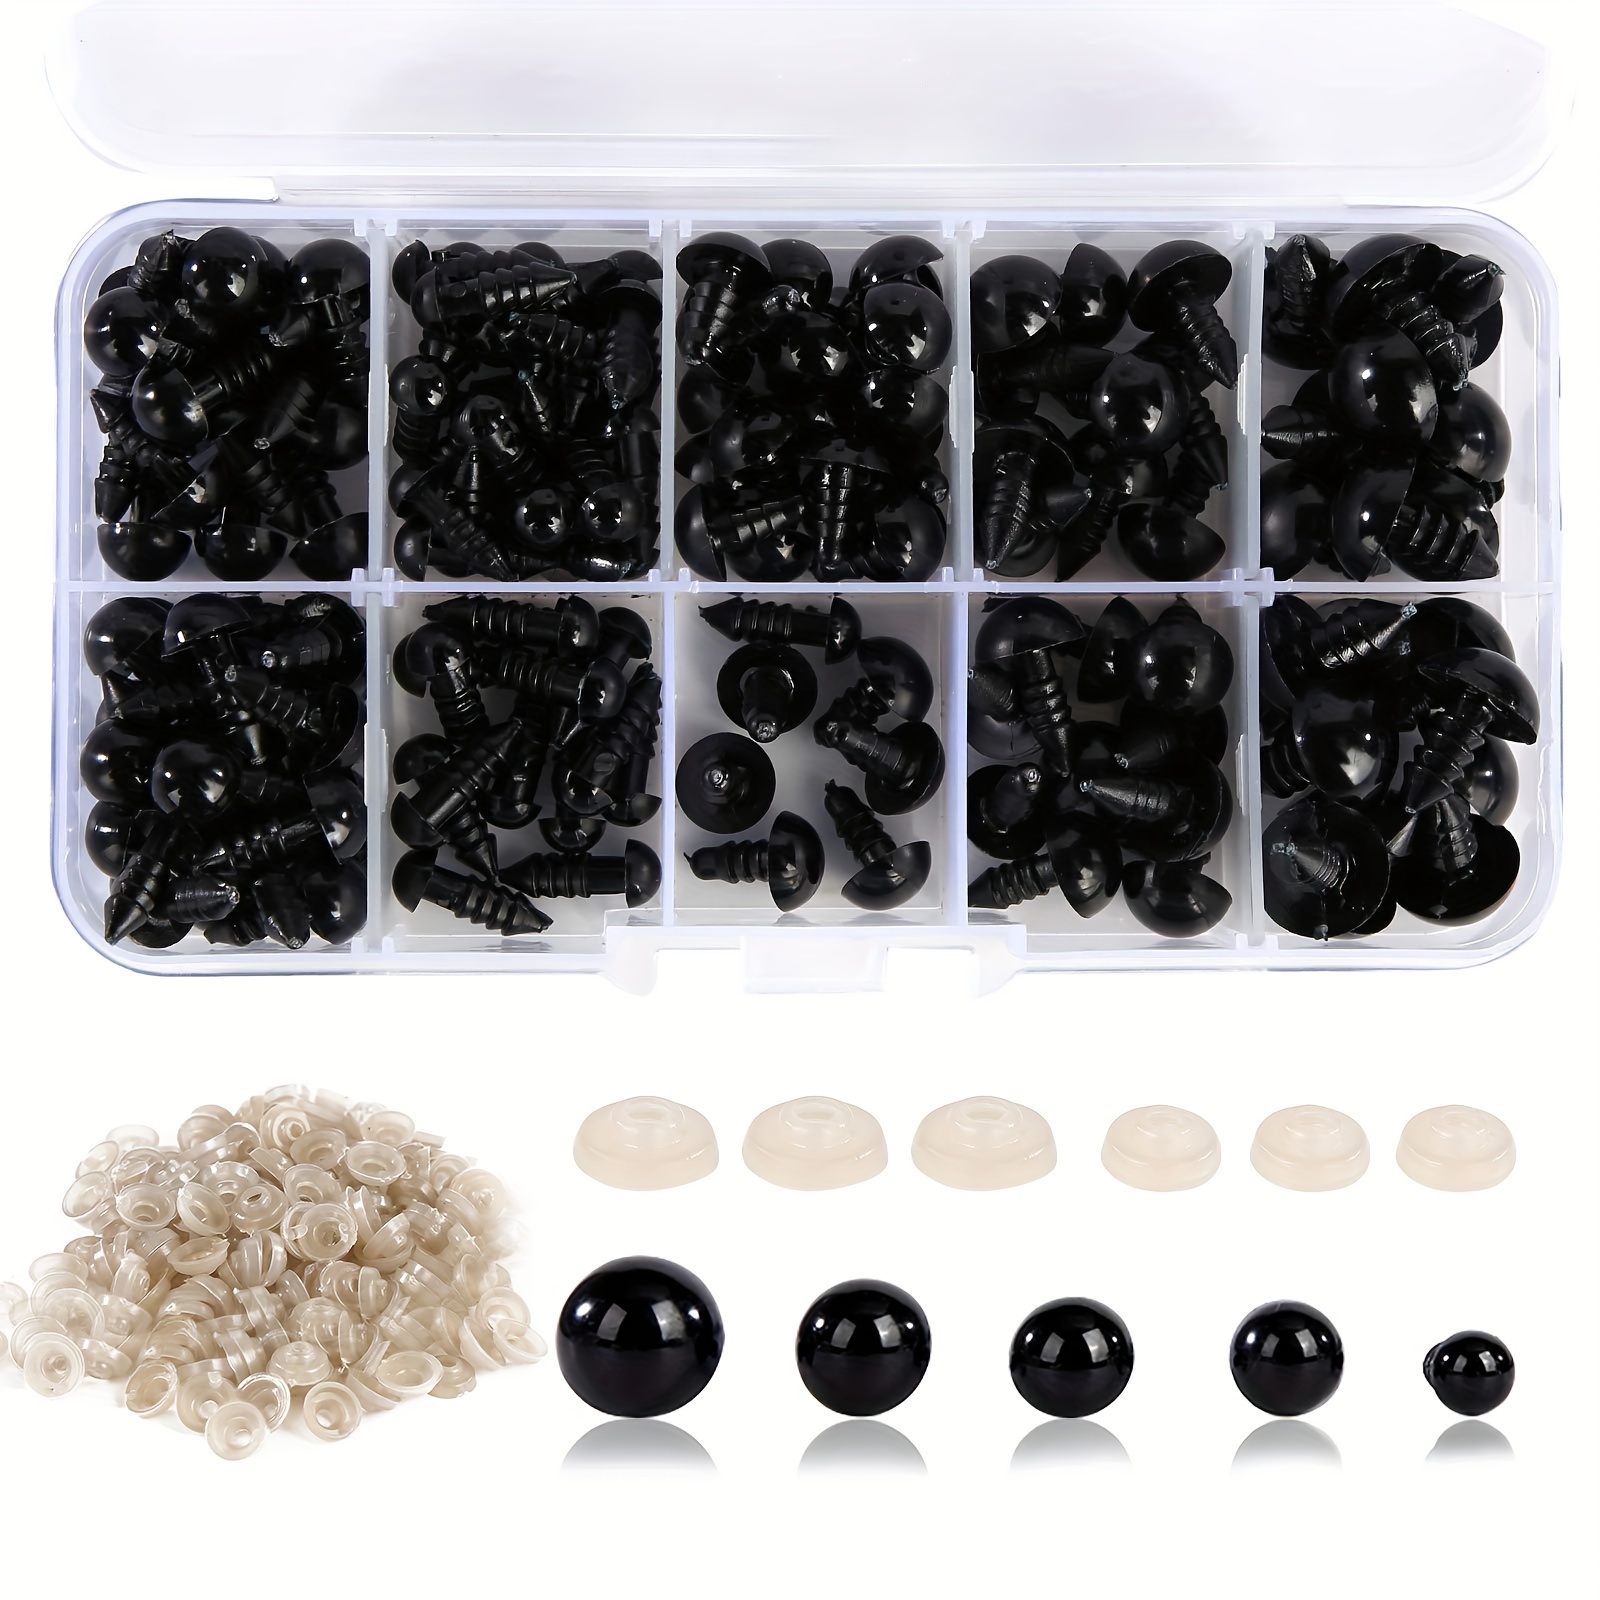 

Value Pack 142pcs Of Craft Eye 0.23in-0.47in Plastic Crochet Safety Eye Filling Animal Crochet Project Teddy Bear Puppet Doll Diy Handicraft Production